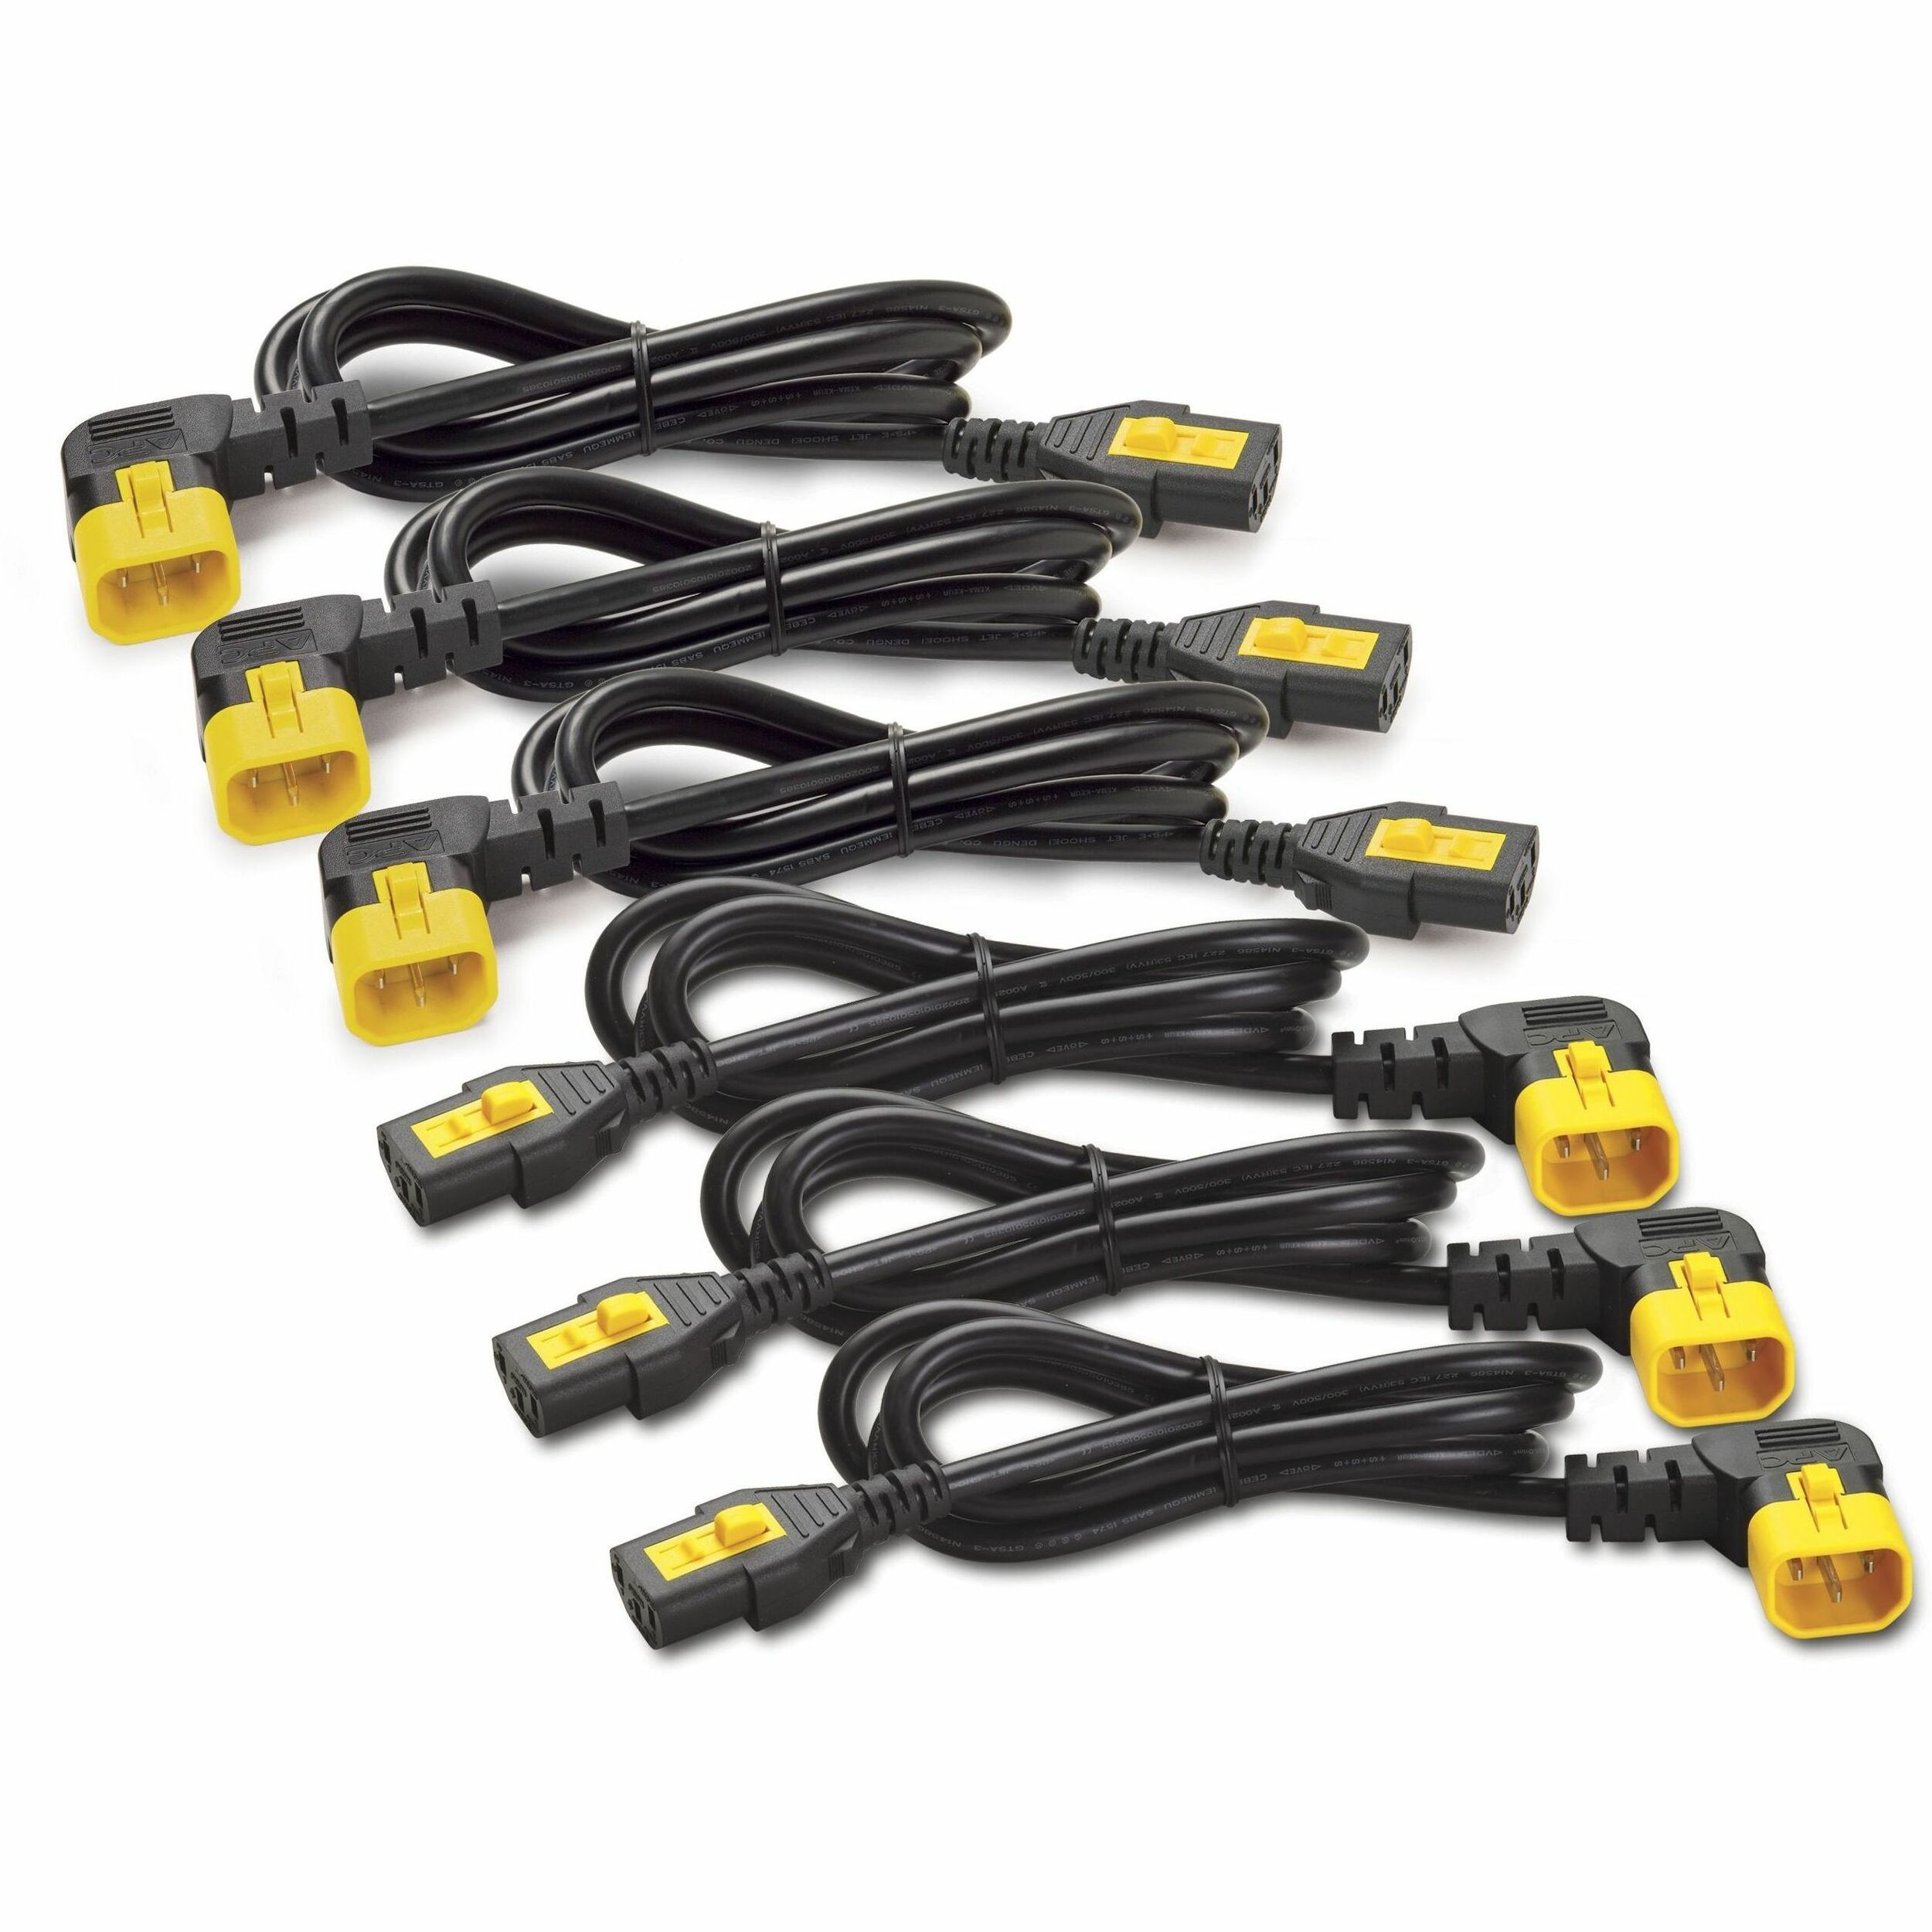 APC by Schneider Electric Power Cord Kit (6 ea), Locking, C13 to 